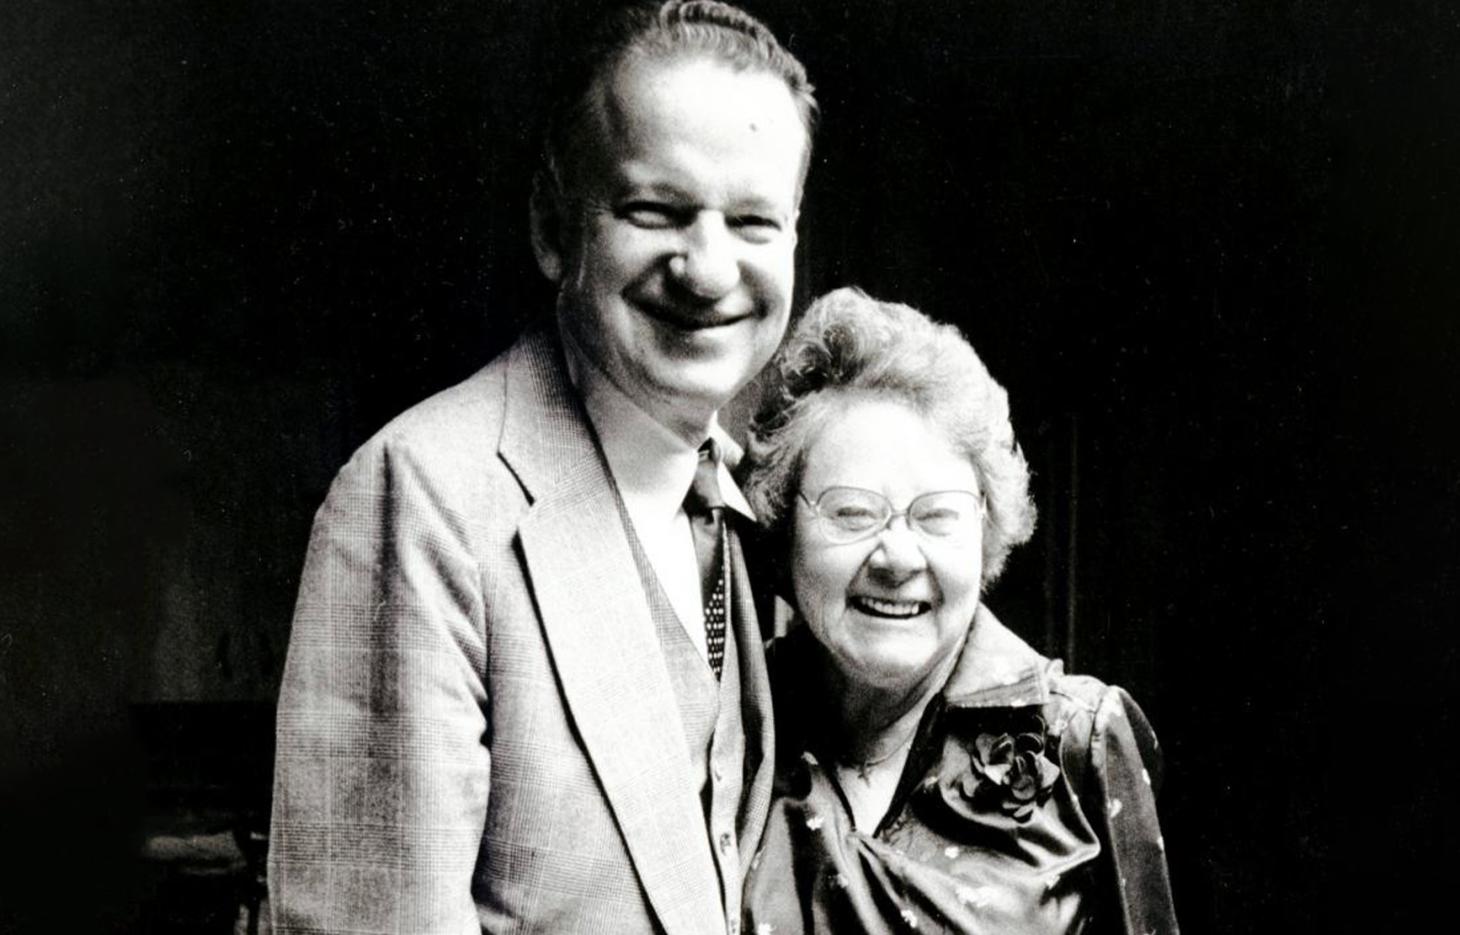 Robert and Clarice MacVicar, hugging each other in a black and white photograph.